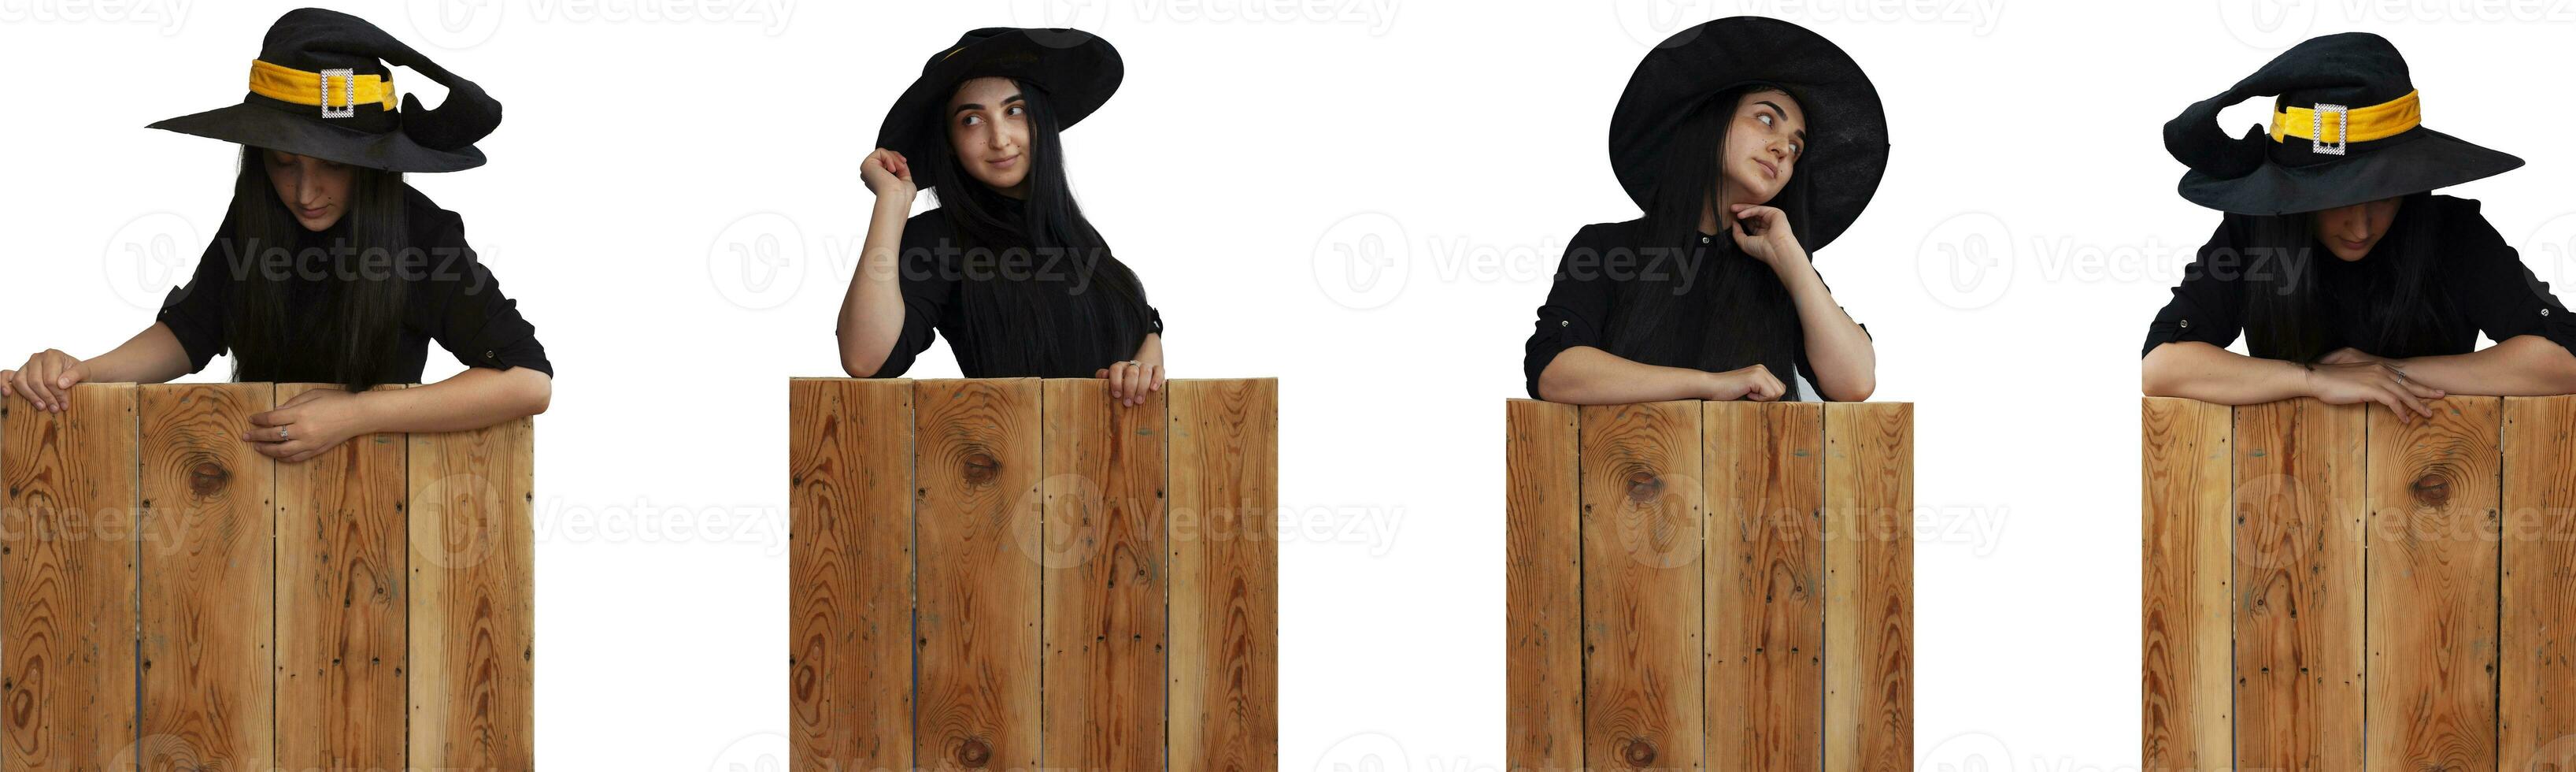 Set of Halloween girl in witch costume on wooden board photo